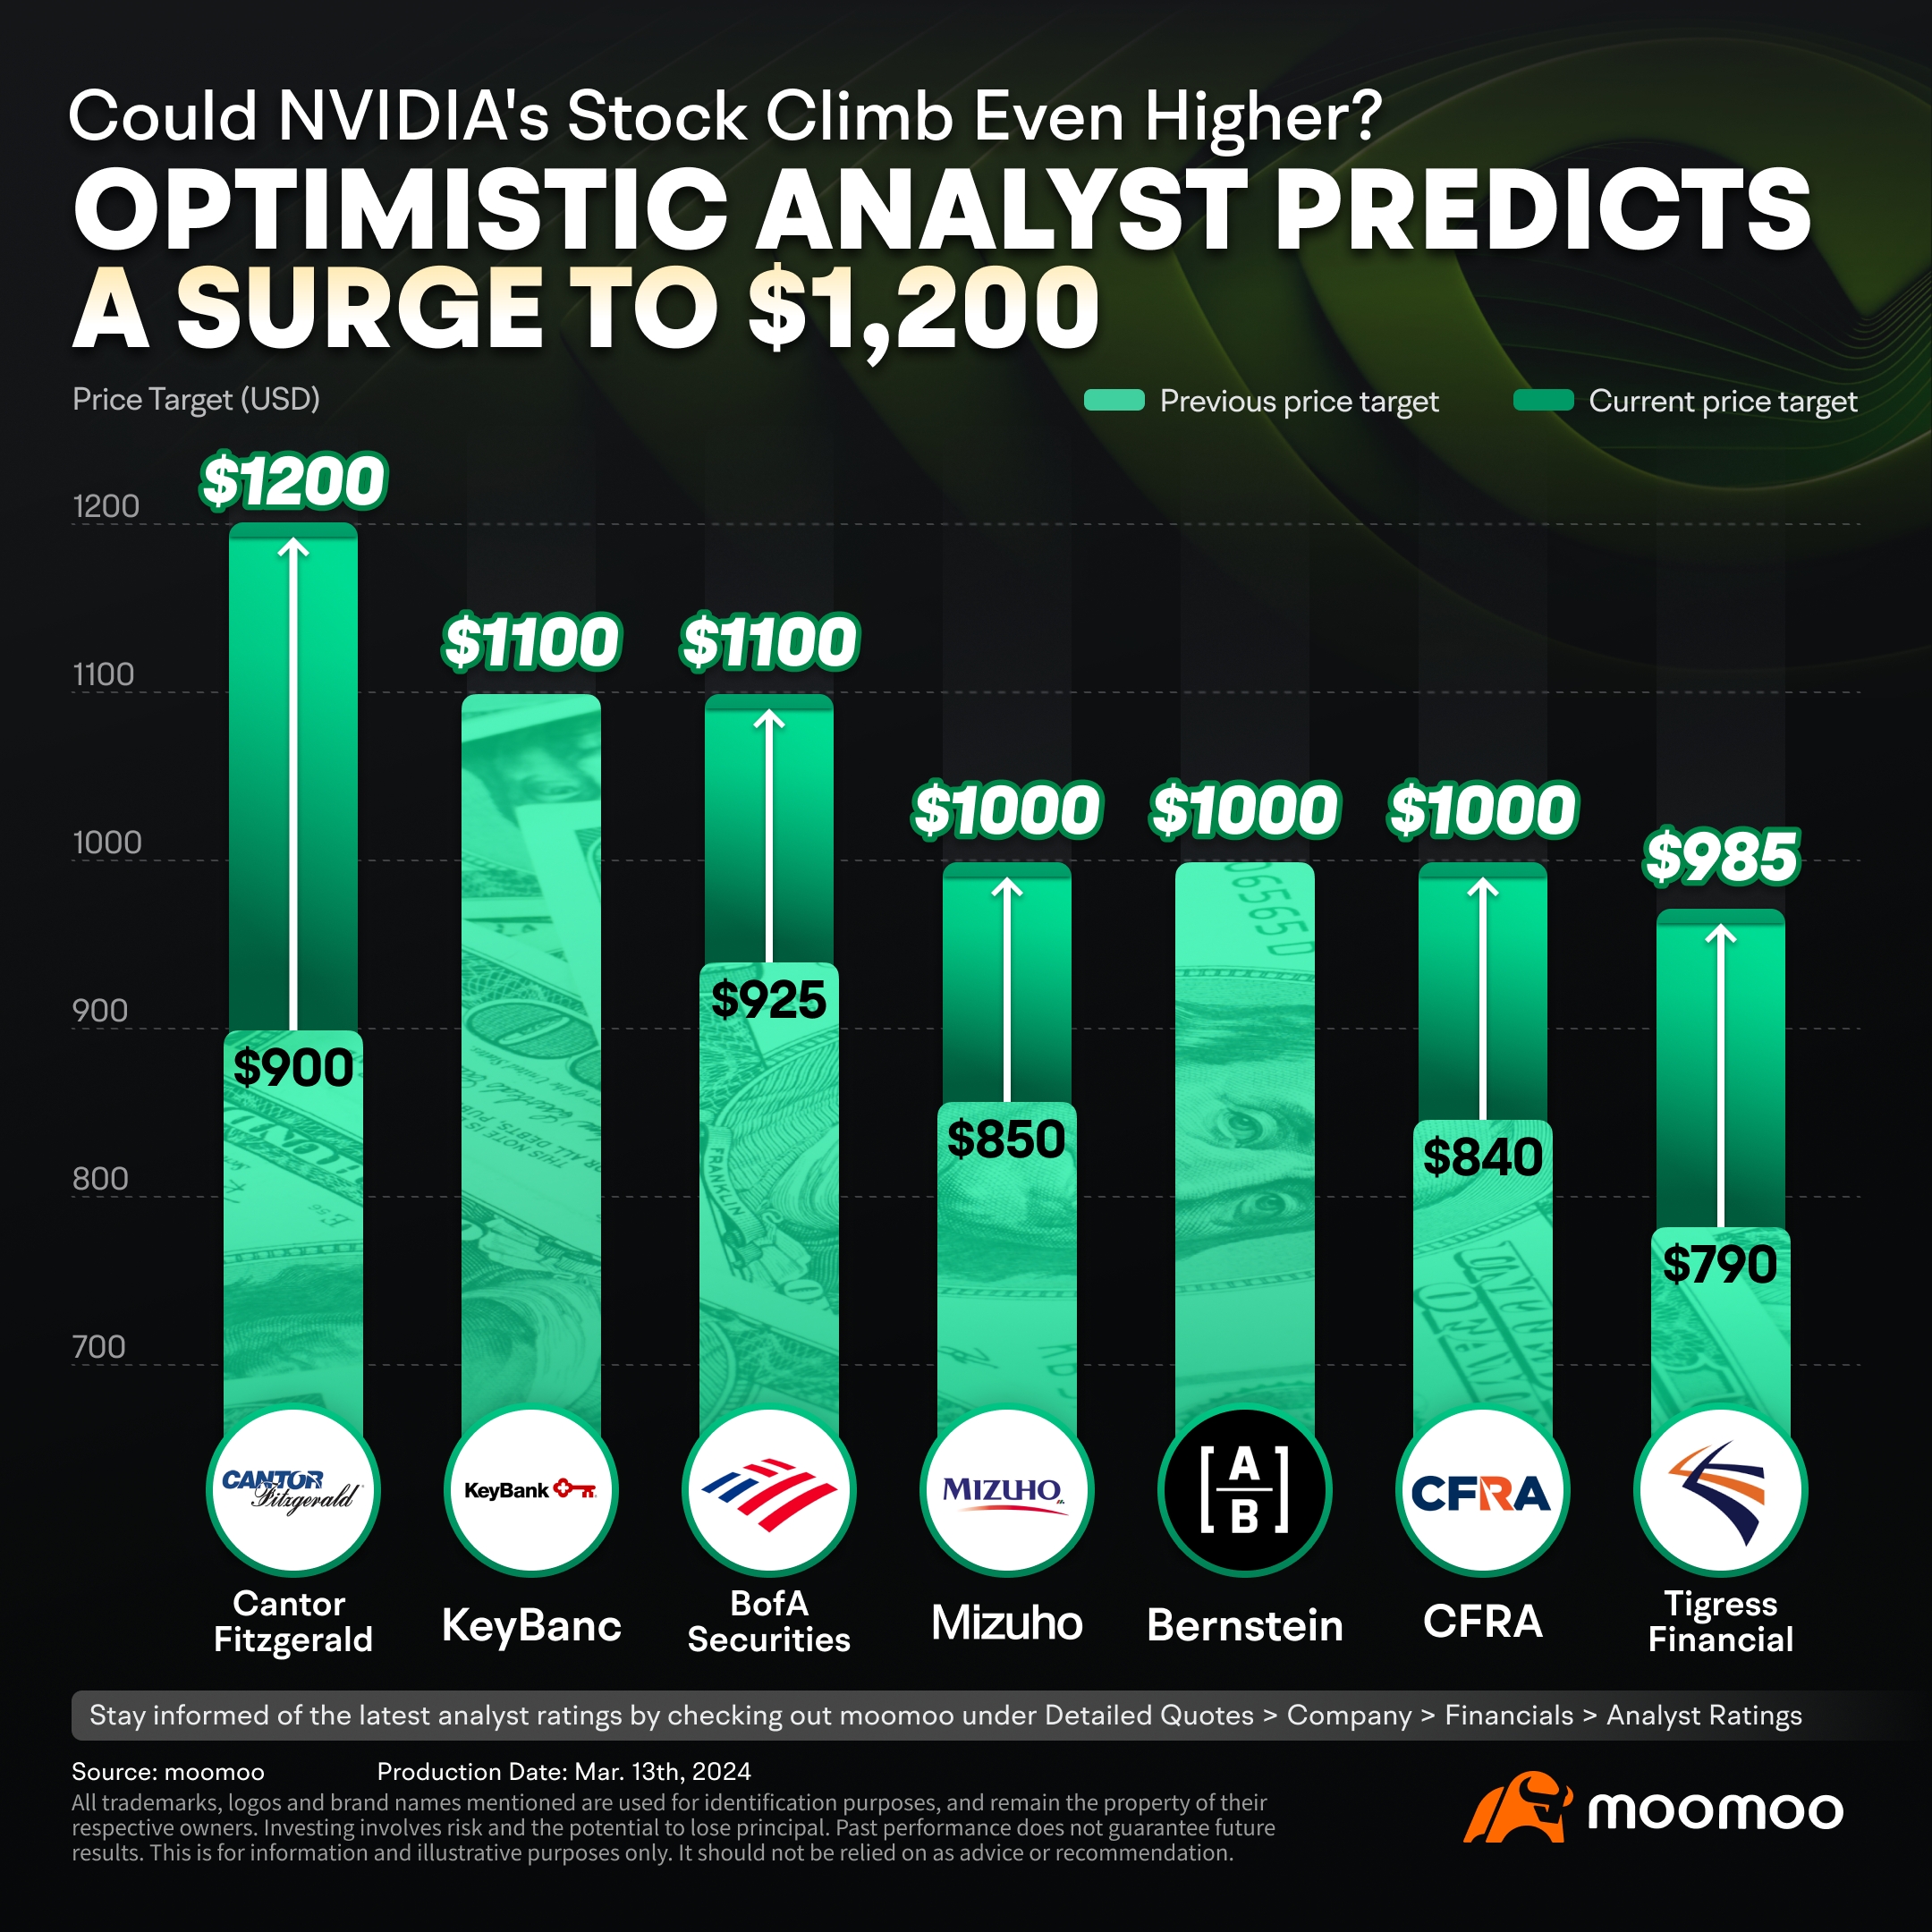 Could NVDA Climb Even Higher? Optimistic Analyst Predicts a Surge to $1,200